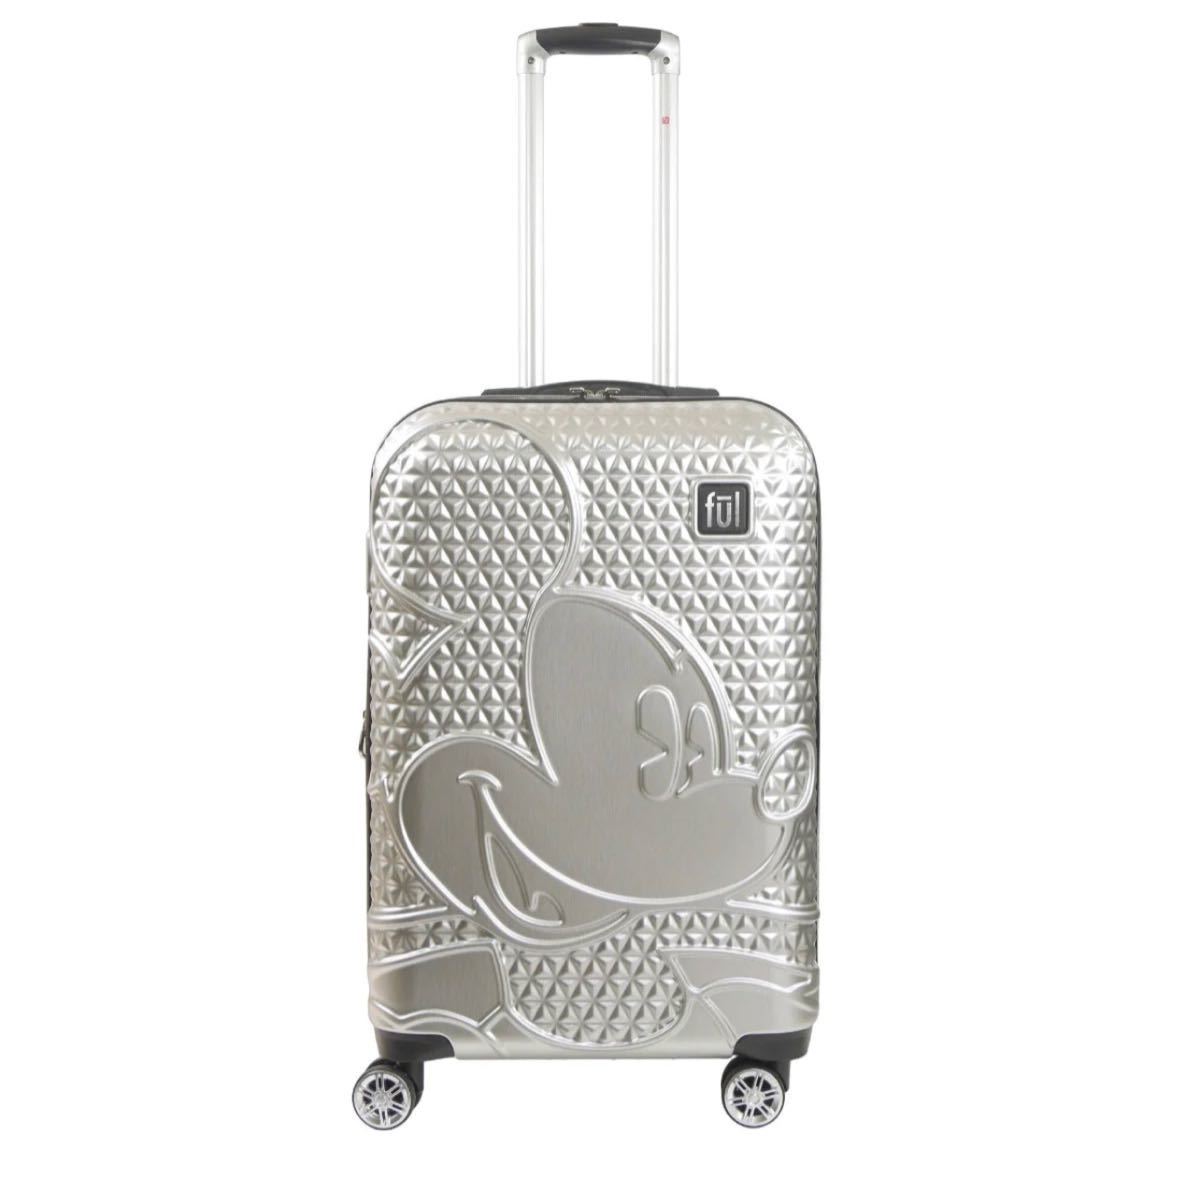 ful ミッキーマウス　スーツケース　キャリーケース　旅行バッグ　アメリカ限定商品　ディズニー　FL 26 Silver 海外旅行